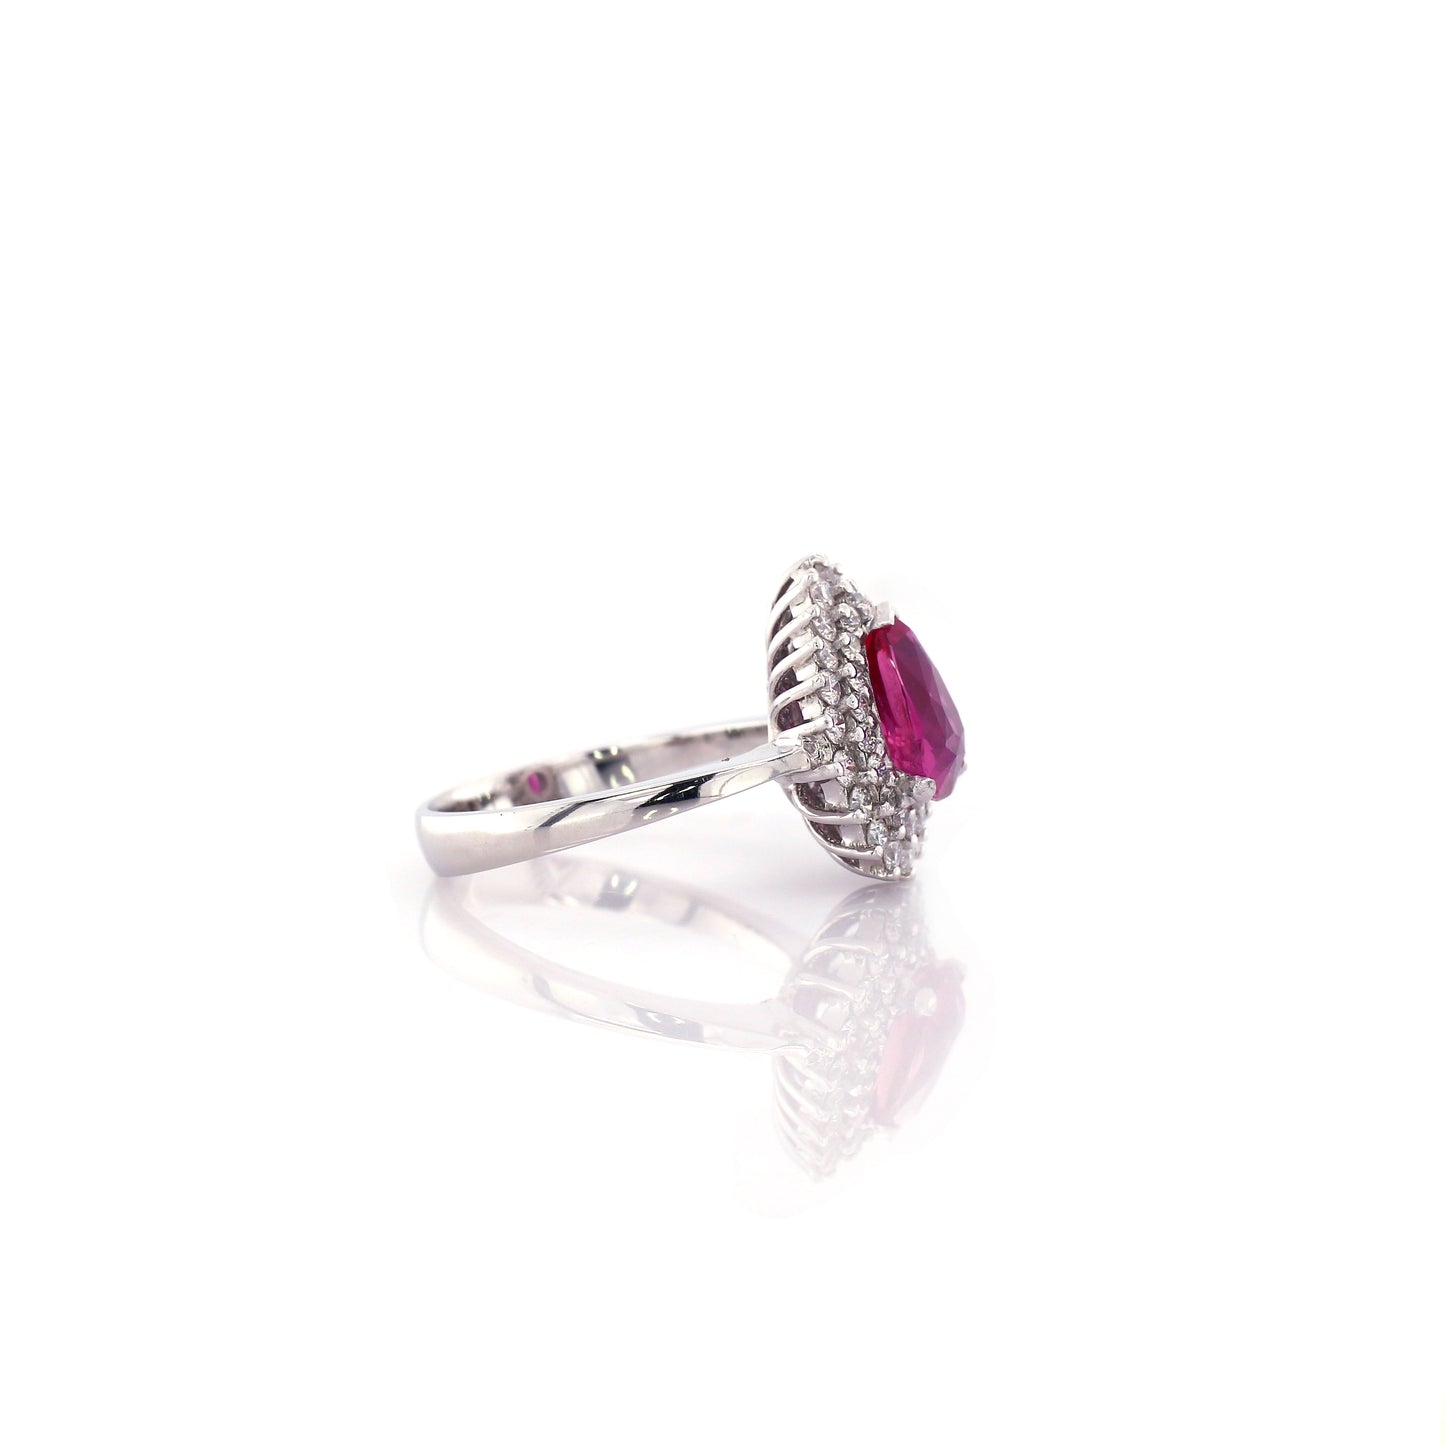 In this stunning estate jewel, a beautifully modeled pear shape Ceylon Ruby with Halo Diamonds